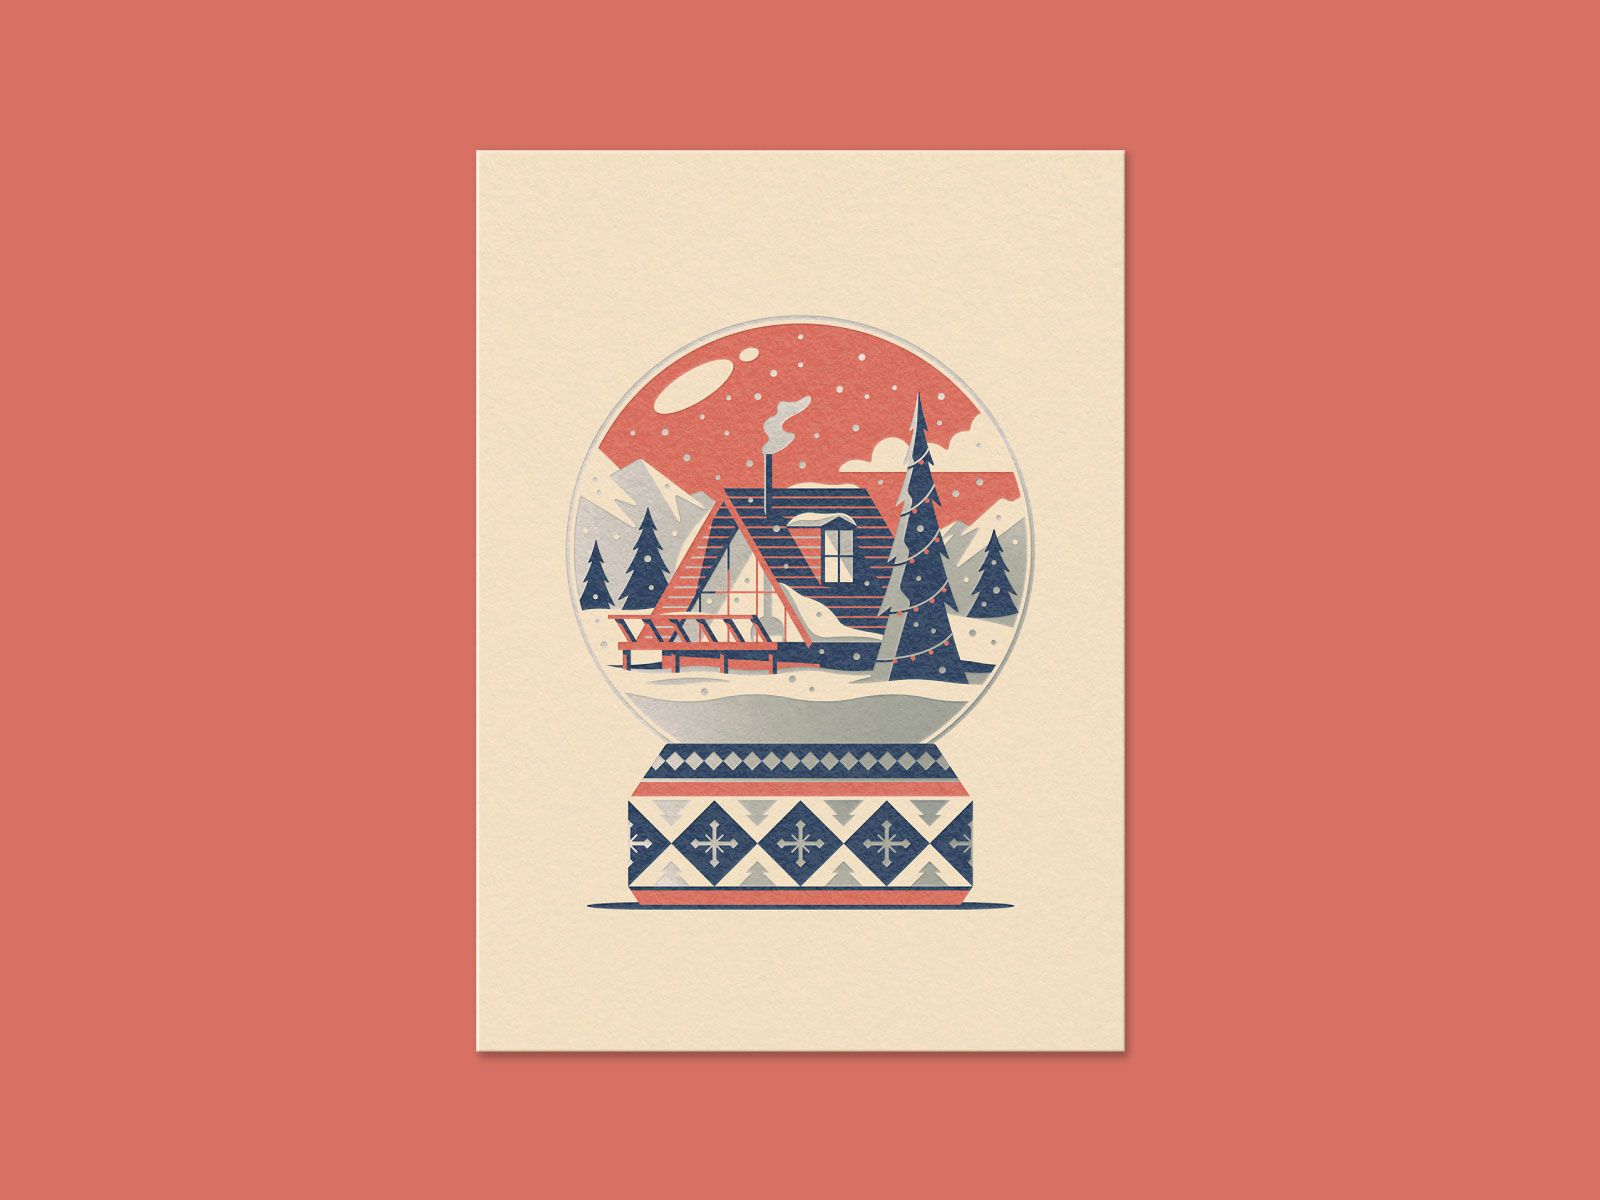 Mountain Home Greeting Card mountains pine trees pine tree snow globe snow winter cabin a-frame illustration geometric dkng studios vector dkng nathan goldman dan kuhlken